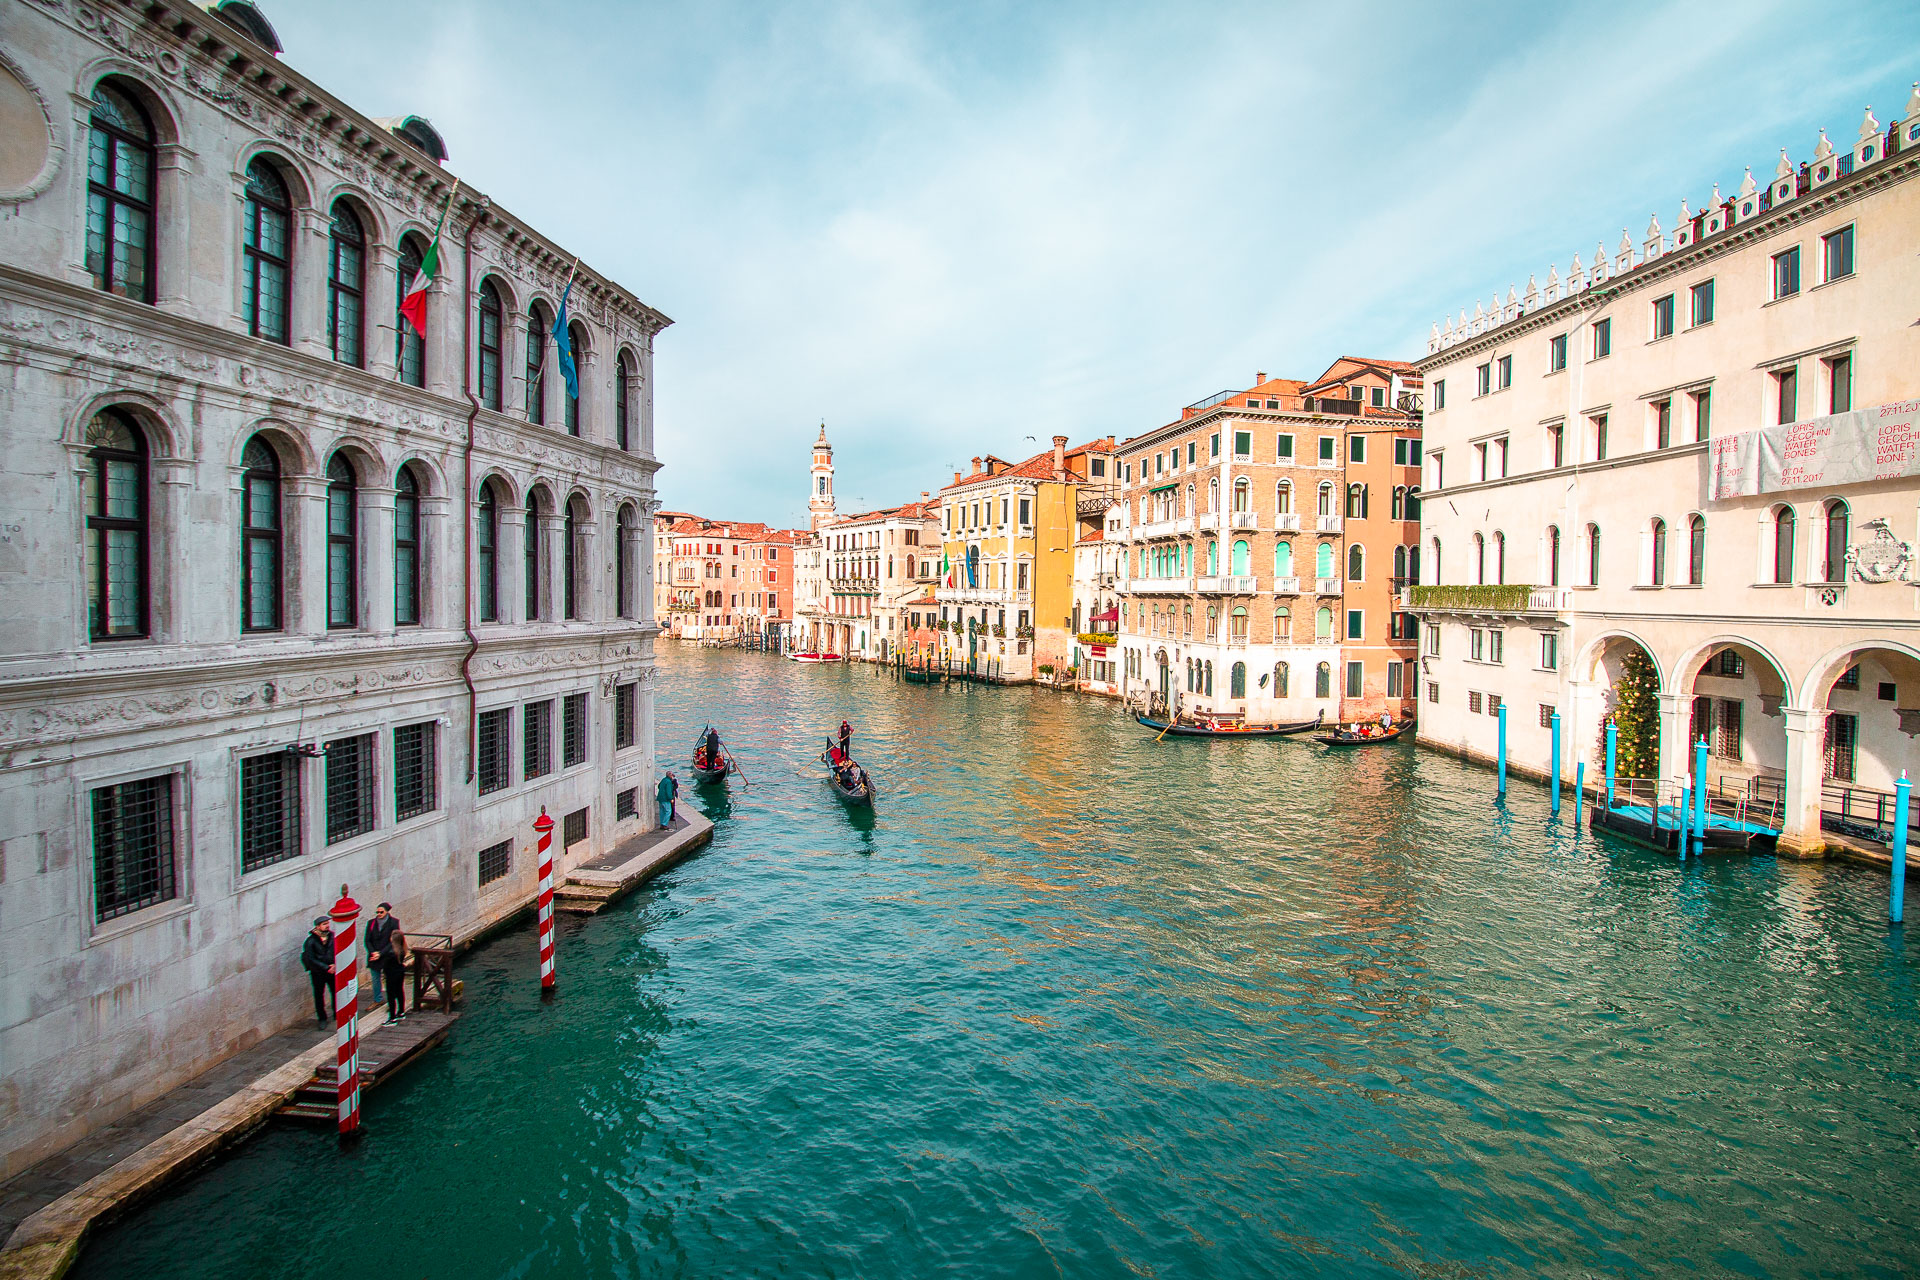 This image shows a canal in Venice lined by gorgeous buildings. 